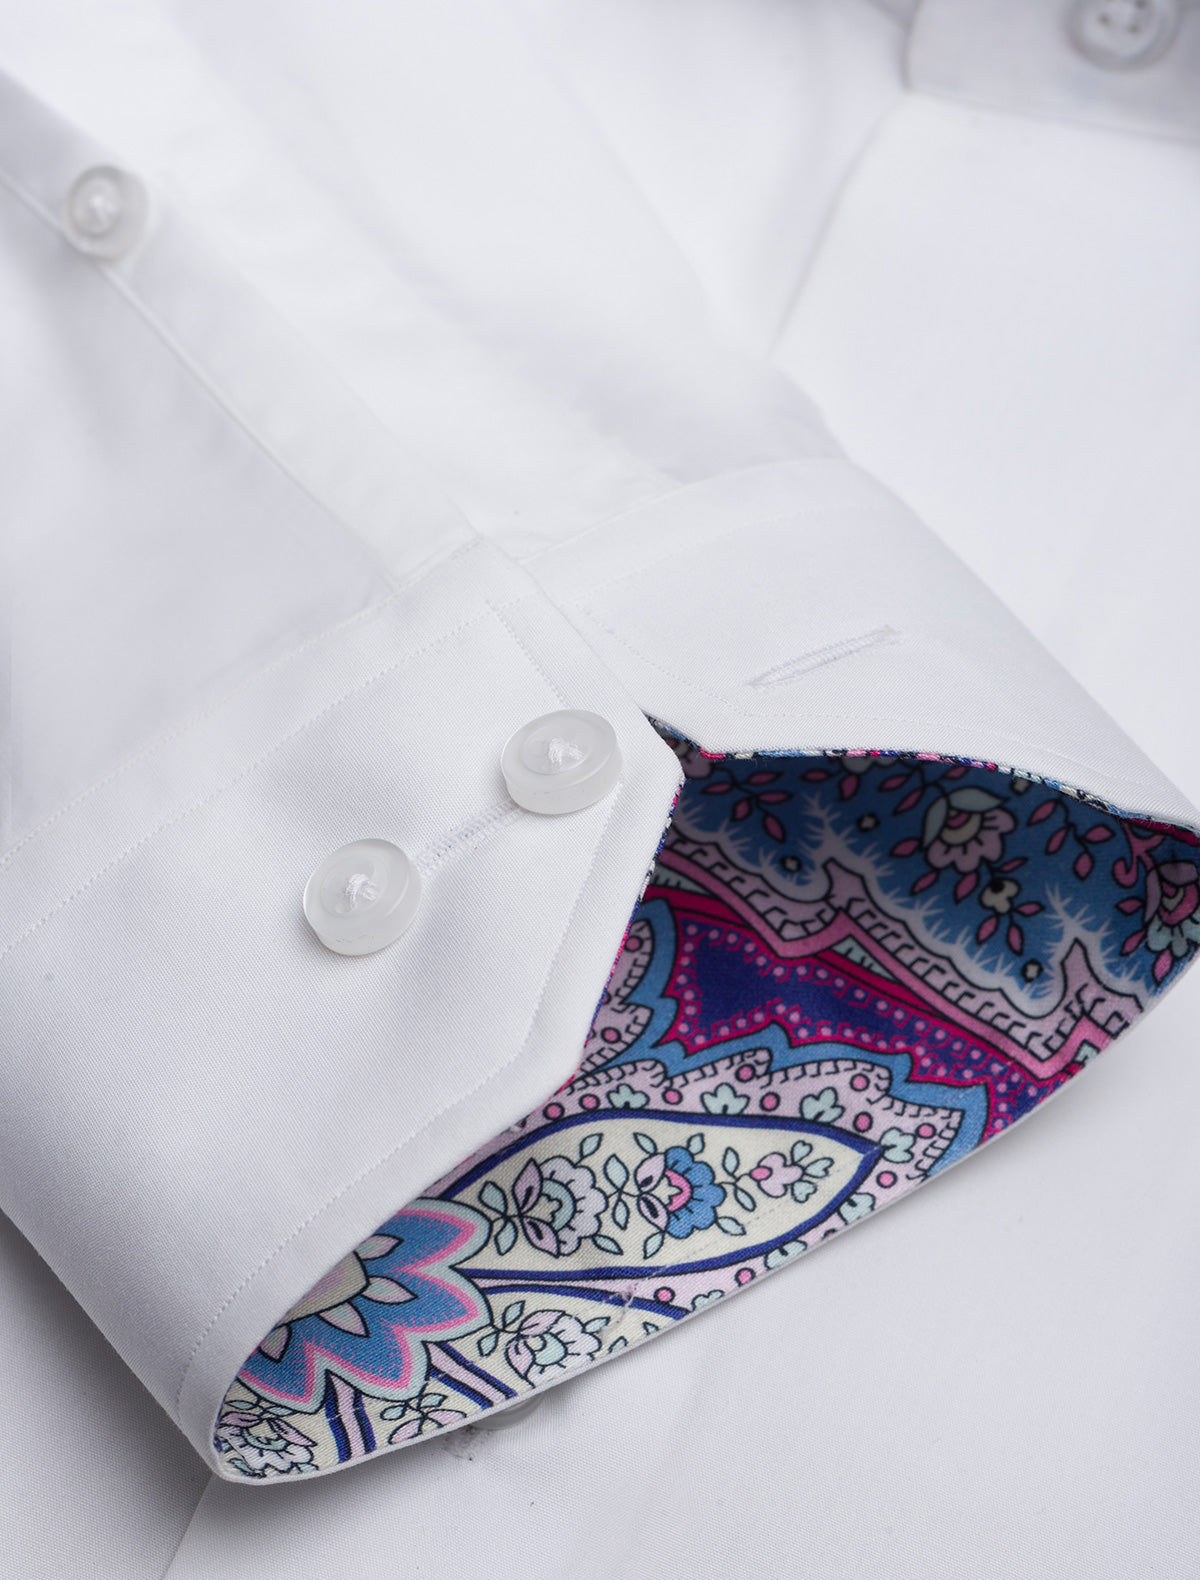 WHITE - FLORAL DETAILED SHIRT